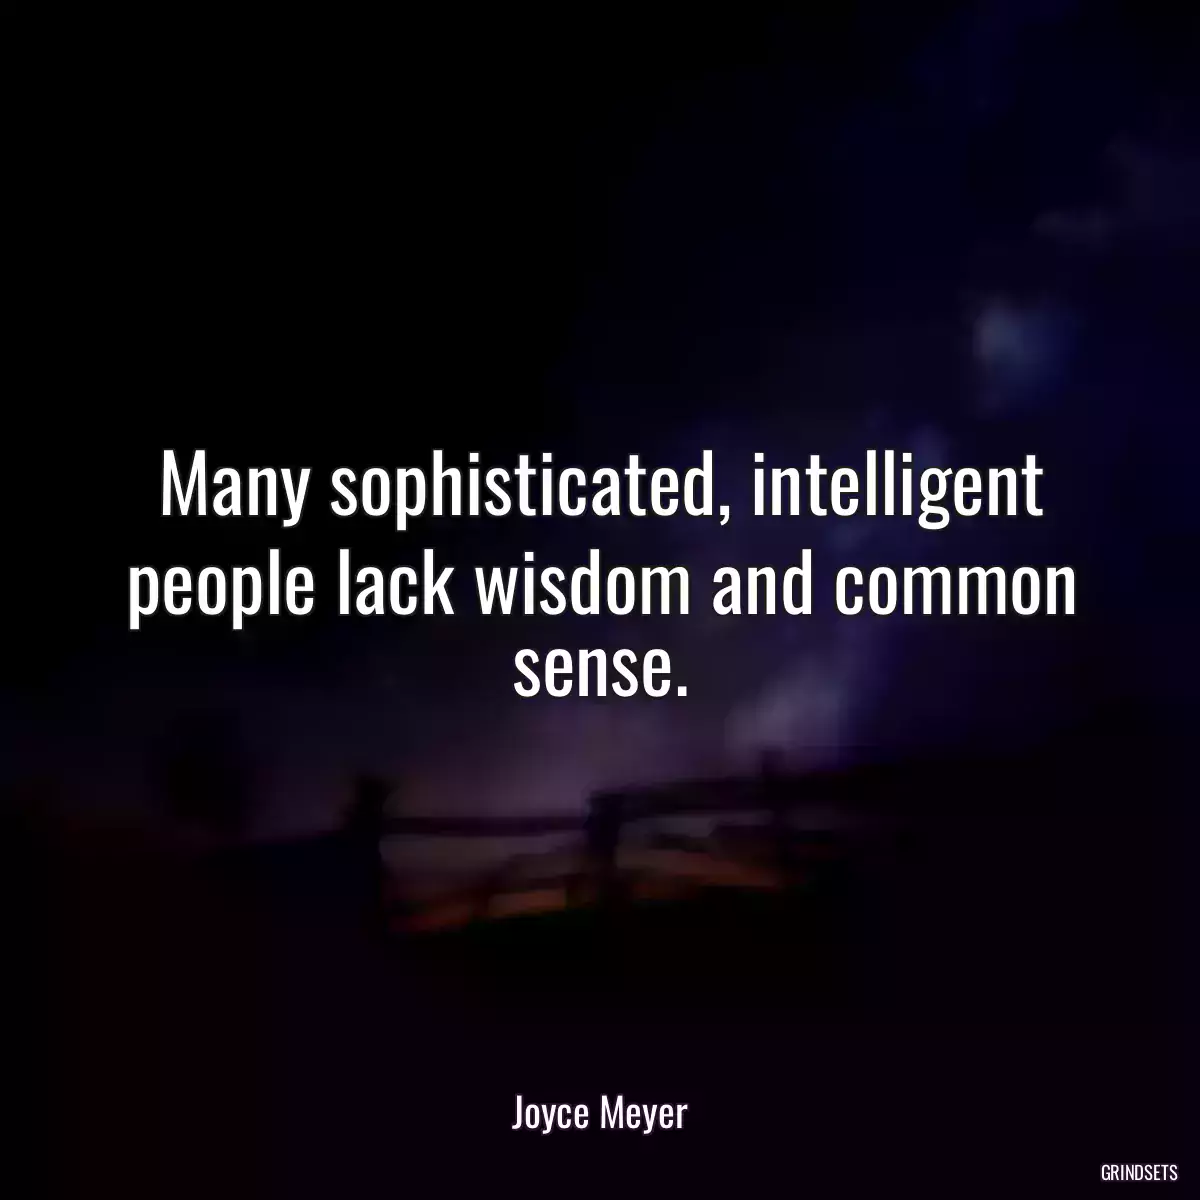 Many sophisticated, intelligent people lack wisdom and common sense.